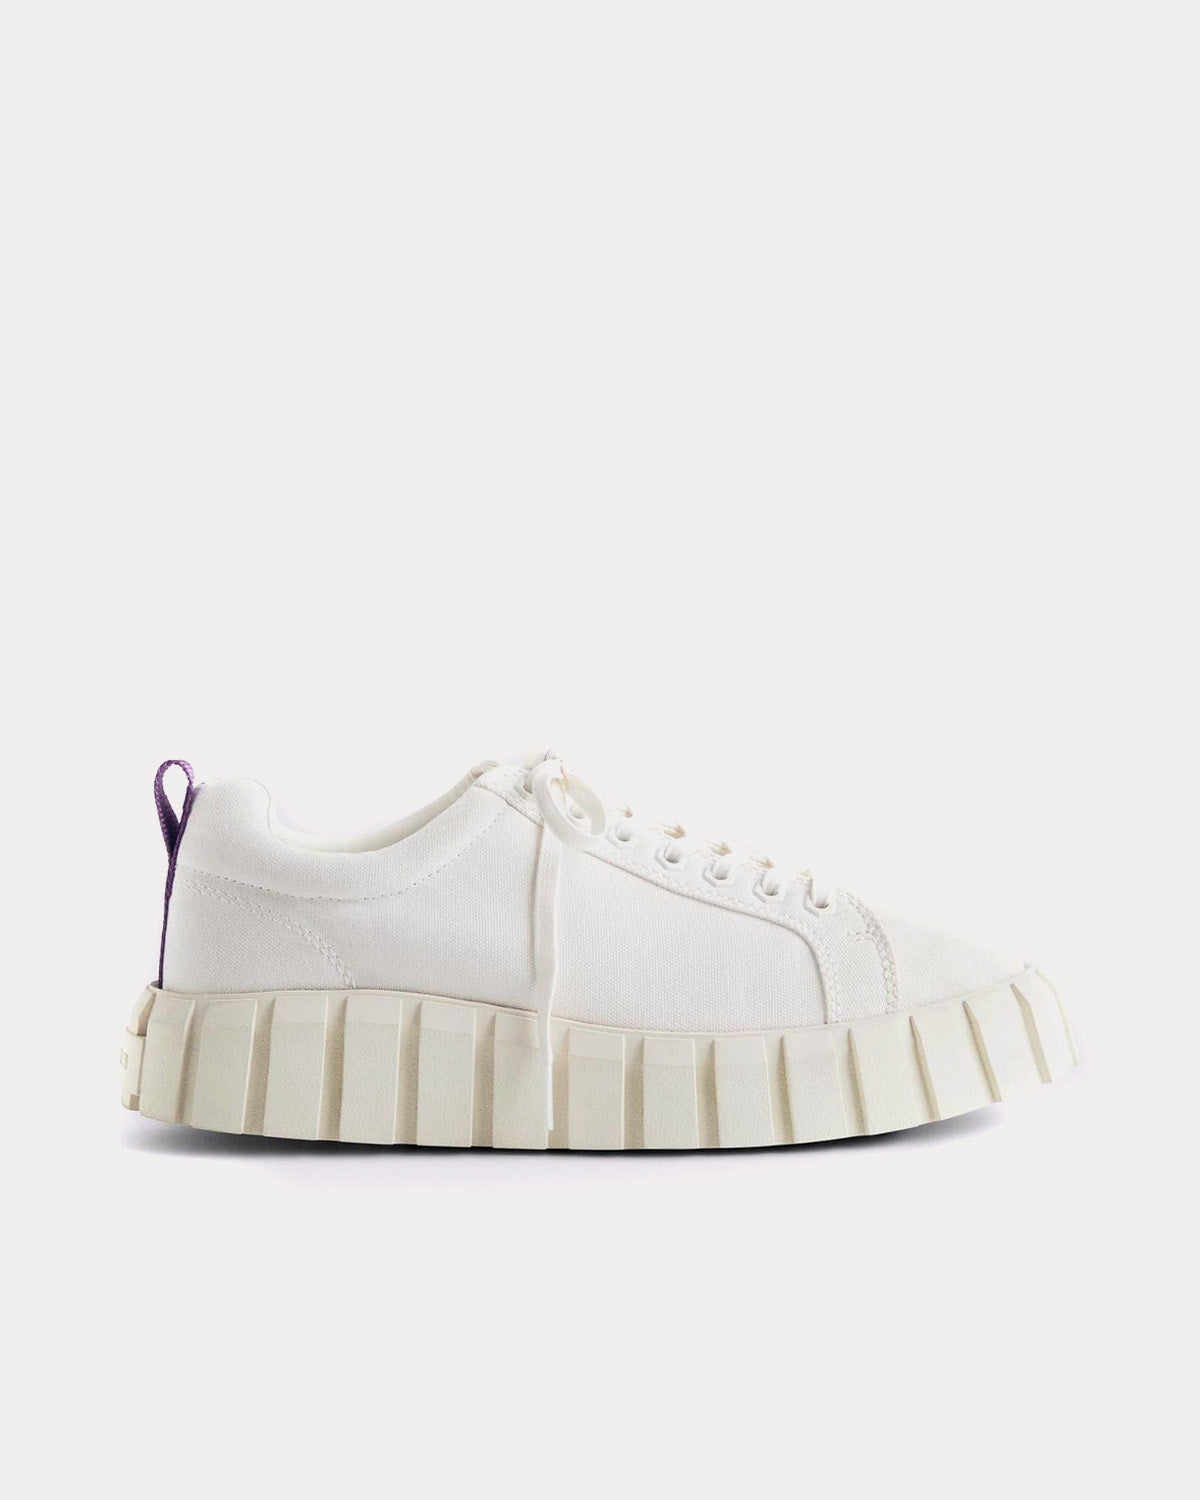 Eytys - Odessa Canvas White Low Top Sneakers